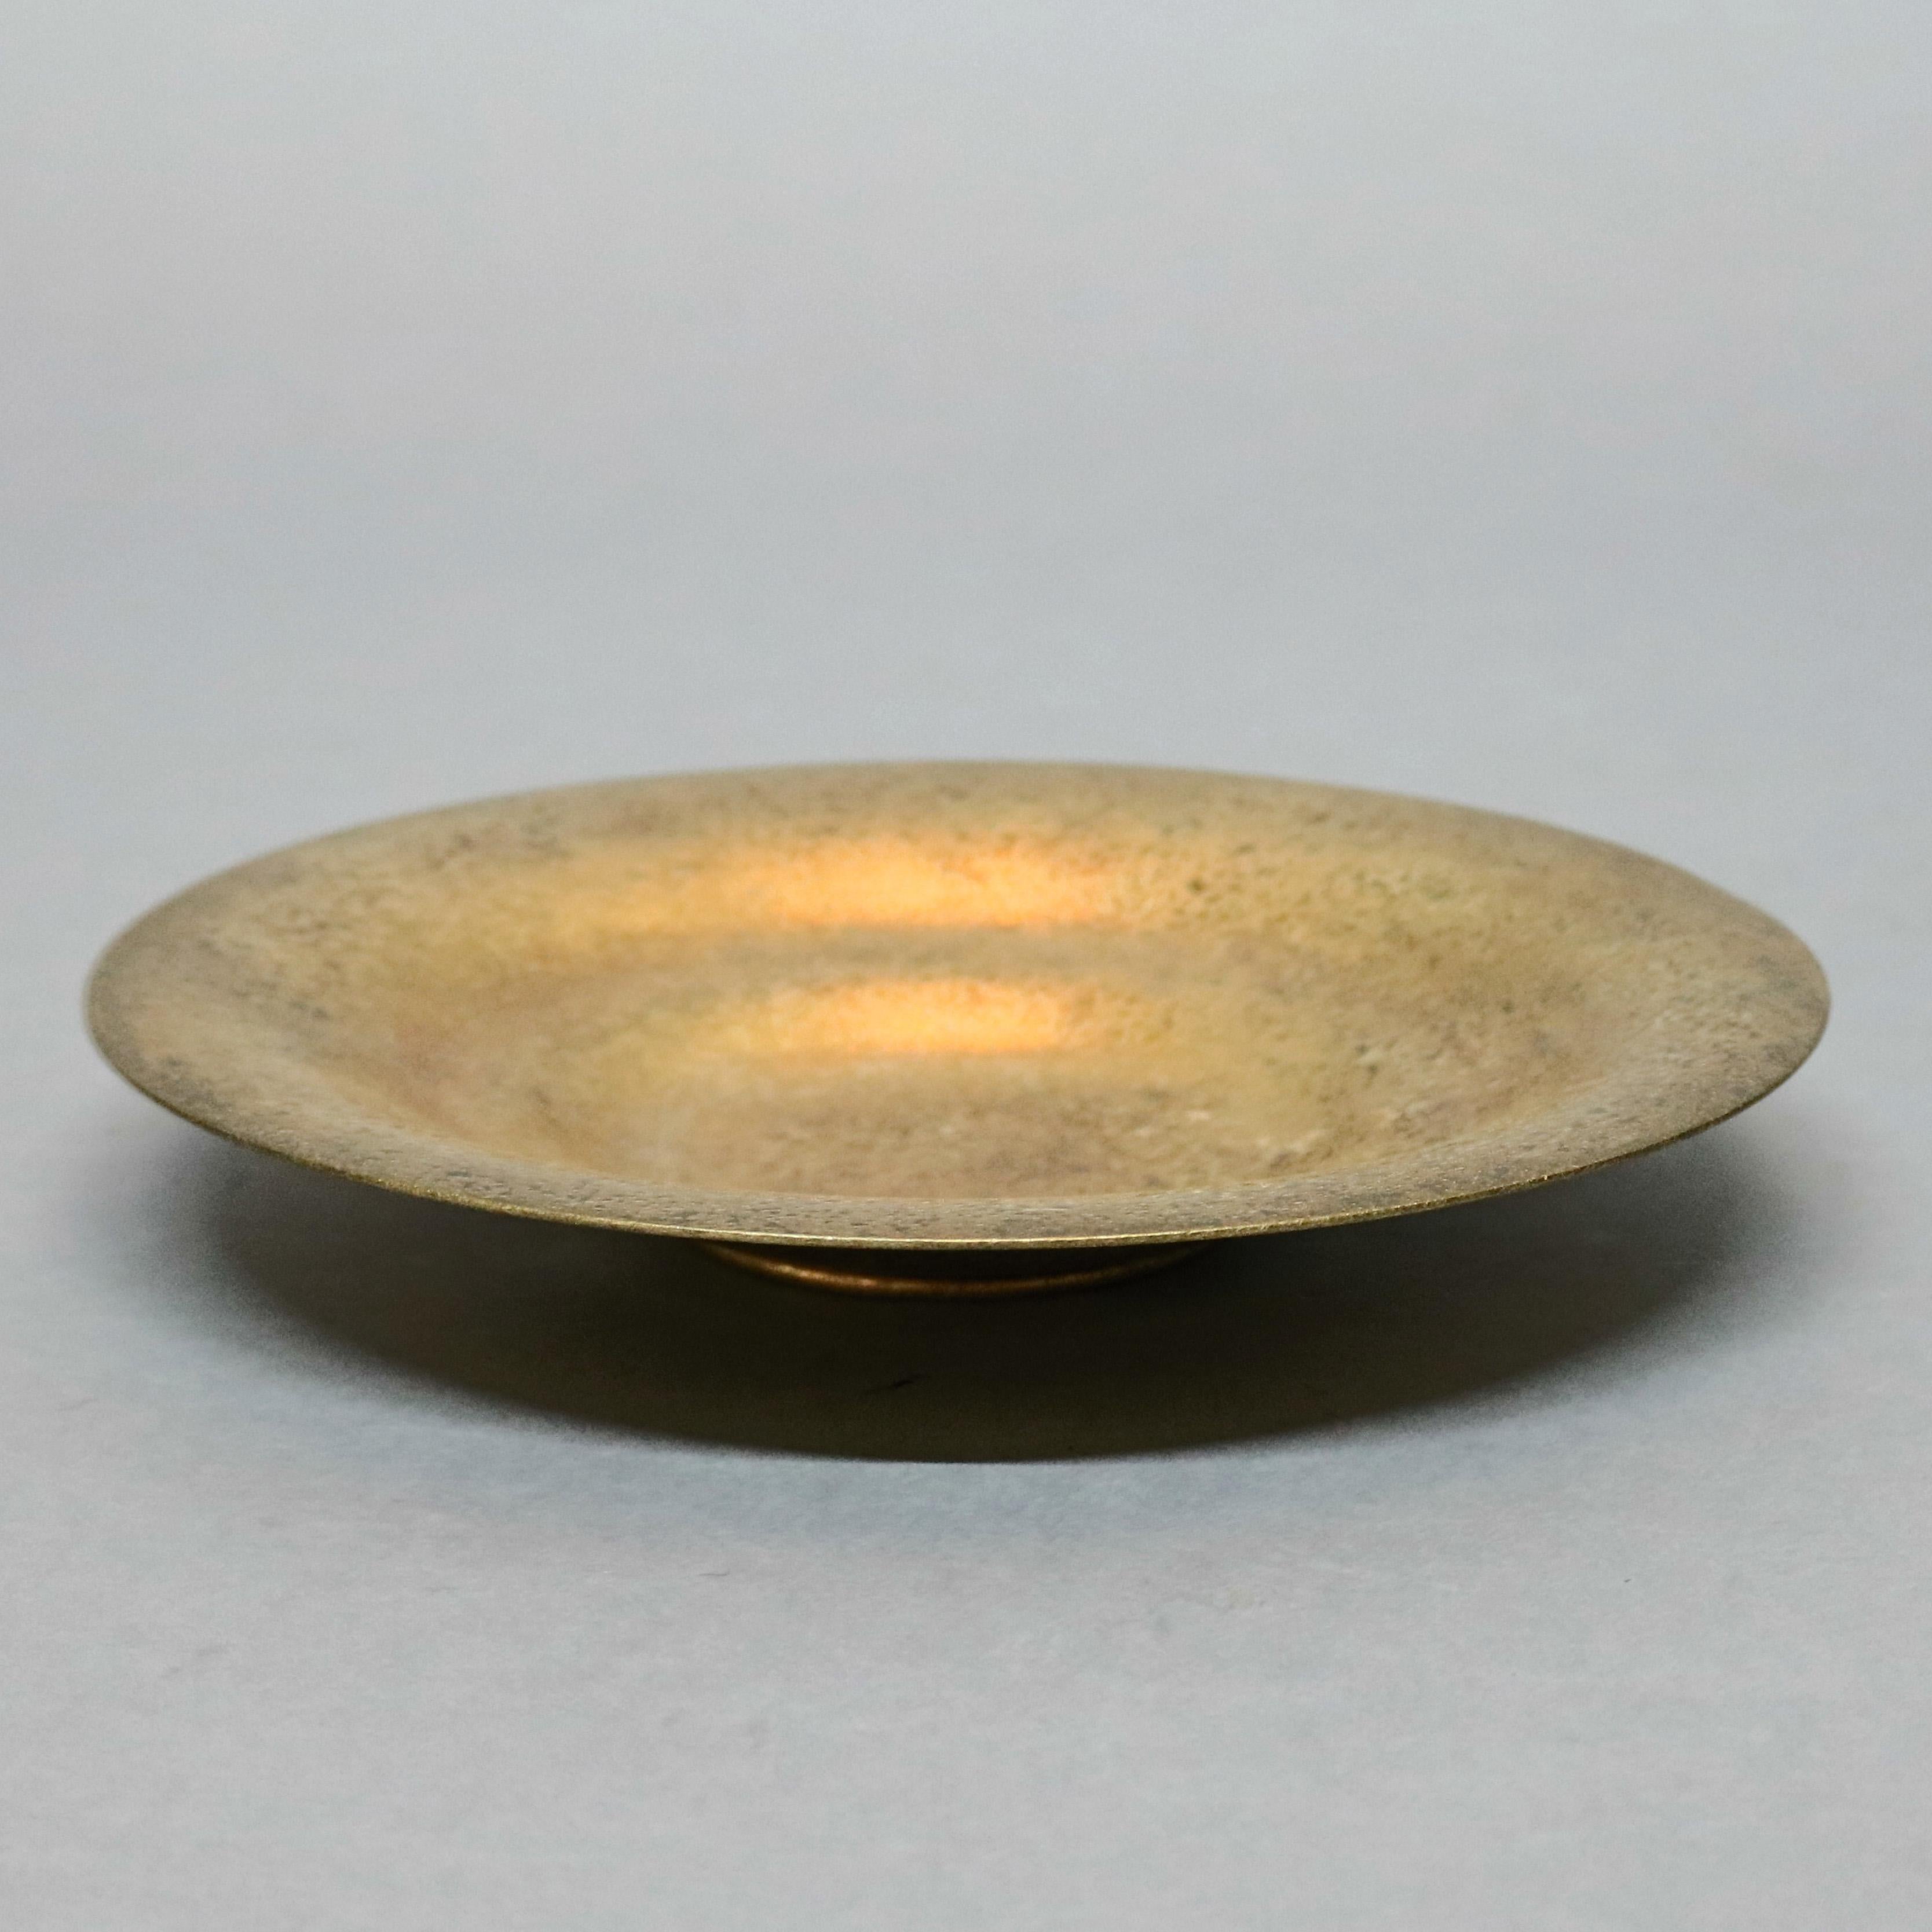 An antique Arts & Crafts Tiffany Studios plate offers bronze construction with stepped well and having textured gilt bronze doré finish, en verso stamped Tiffany Studios as photographed, circa 1910.

Measures: 1.5